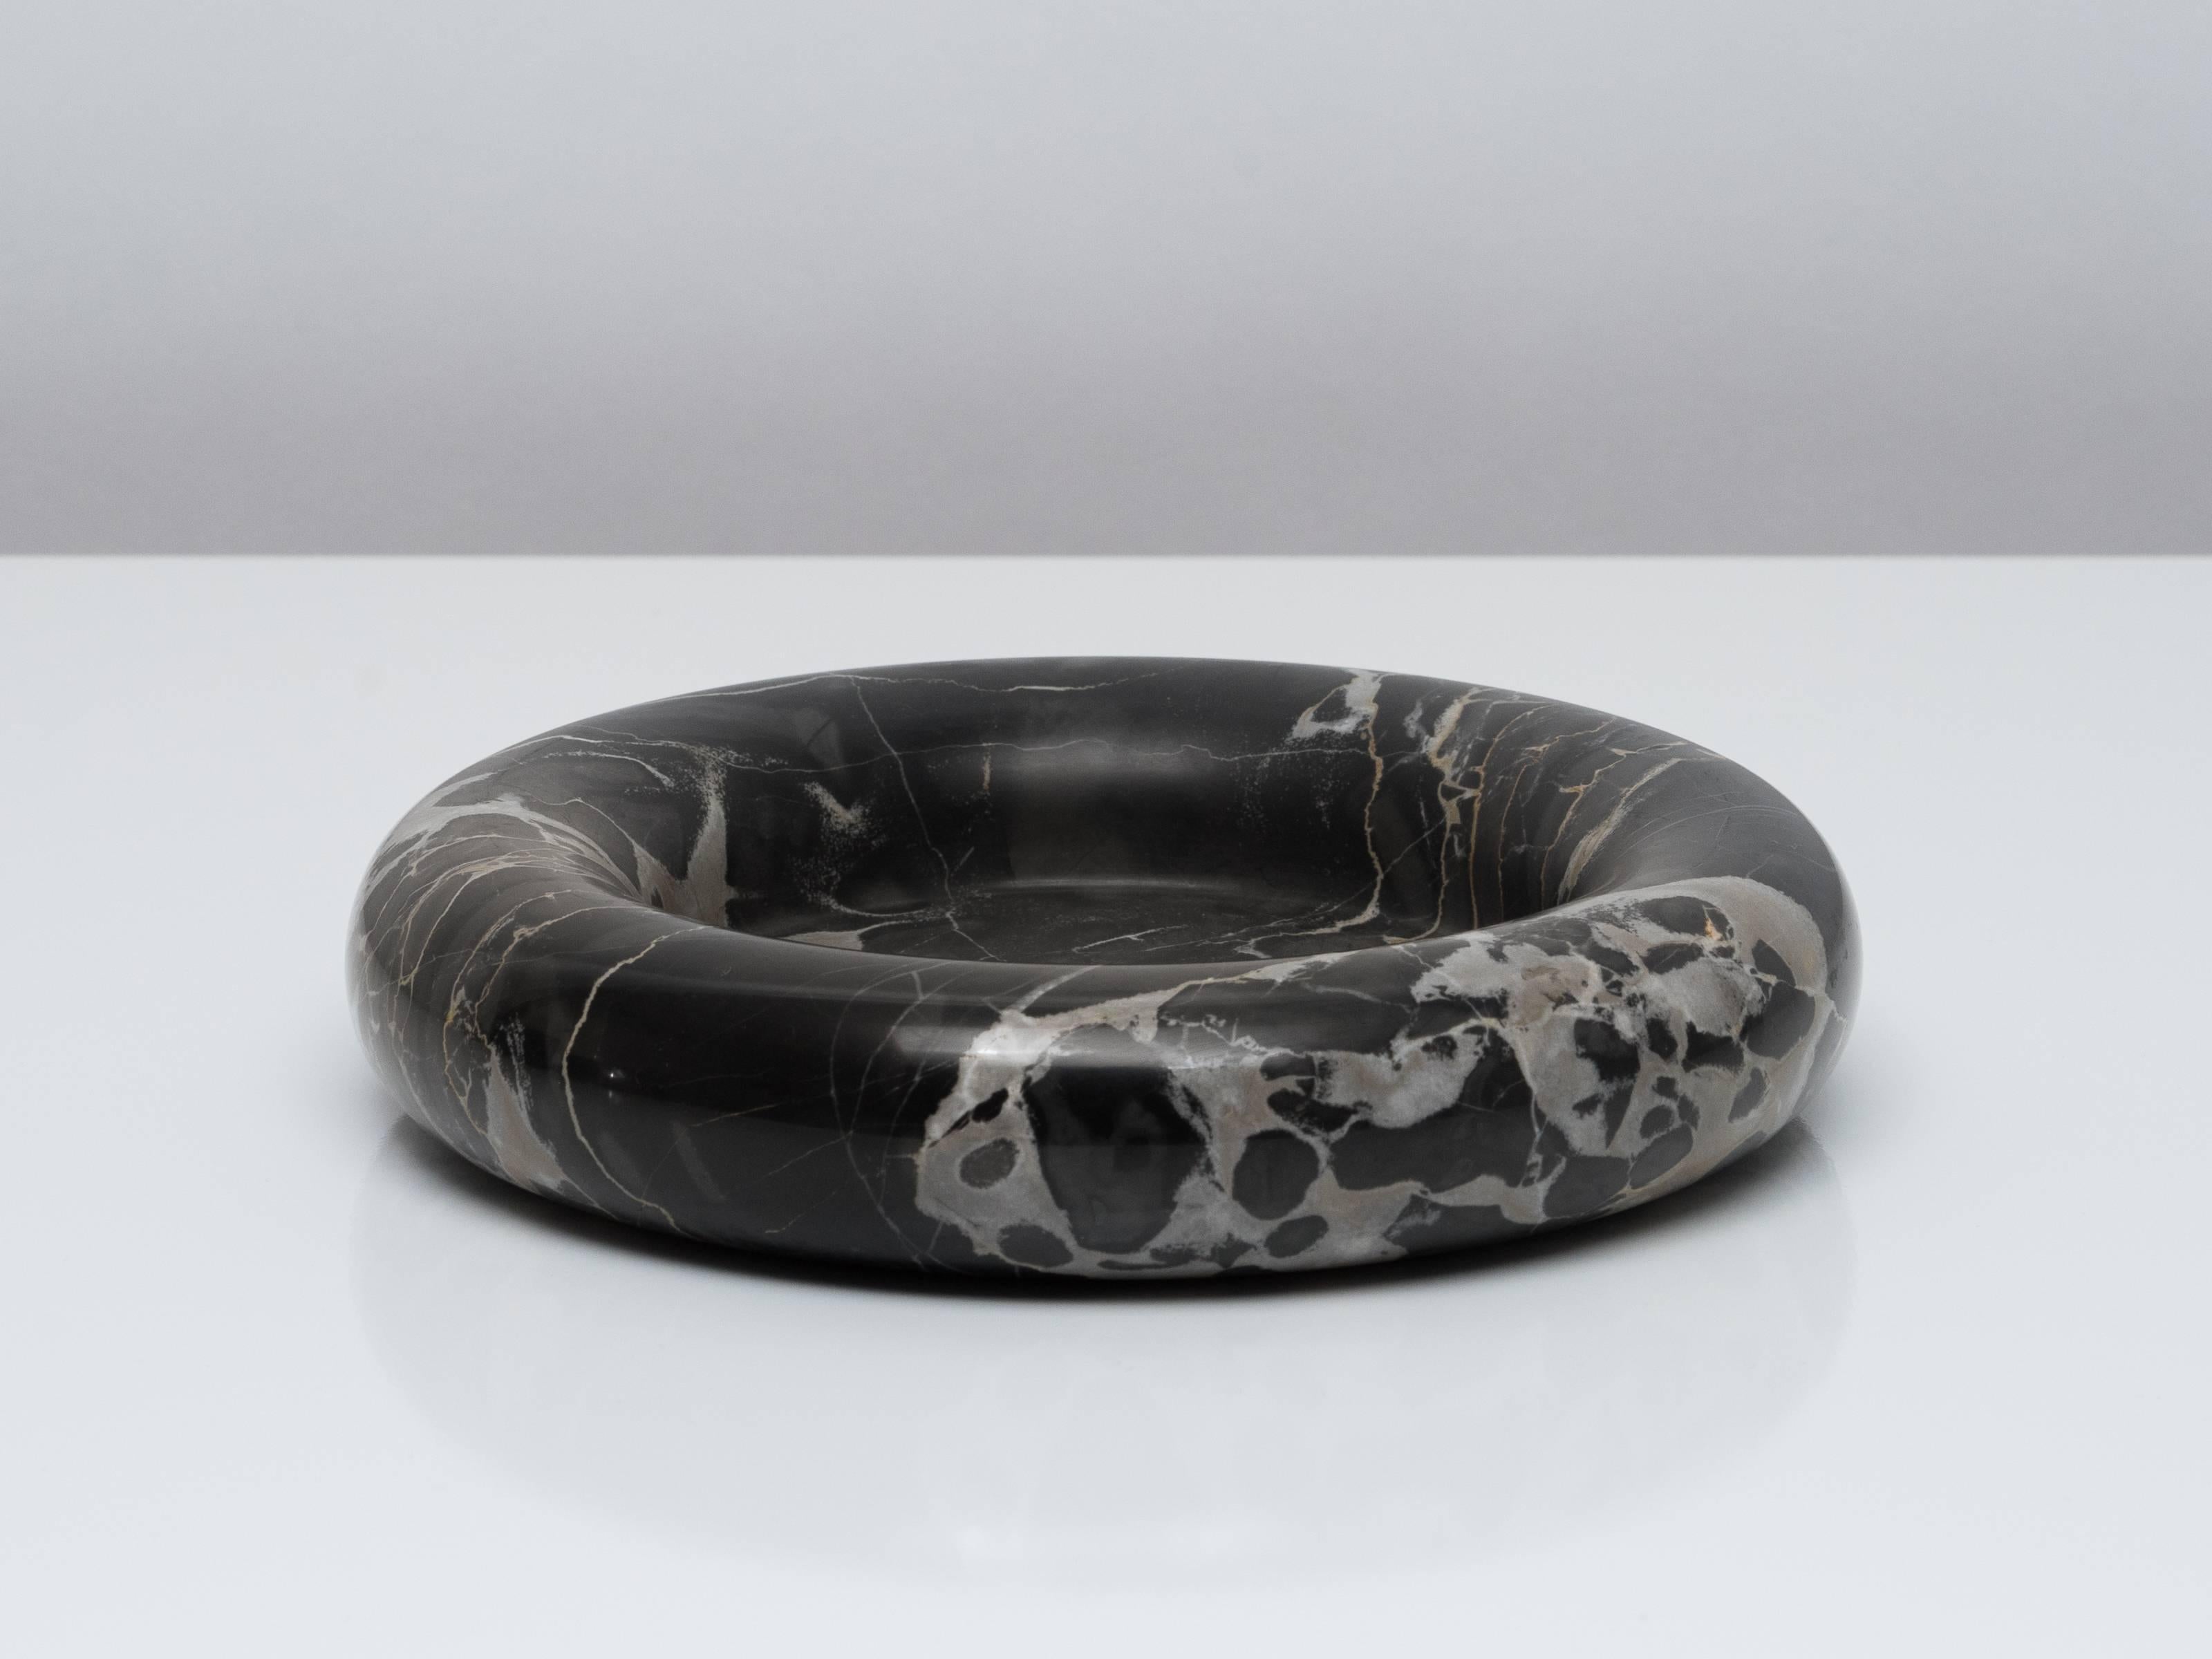 Late 20th Century Large Black Marble Dish with Light Grey and Gold Veining by Up & Up, 1973